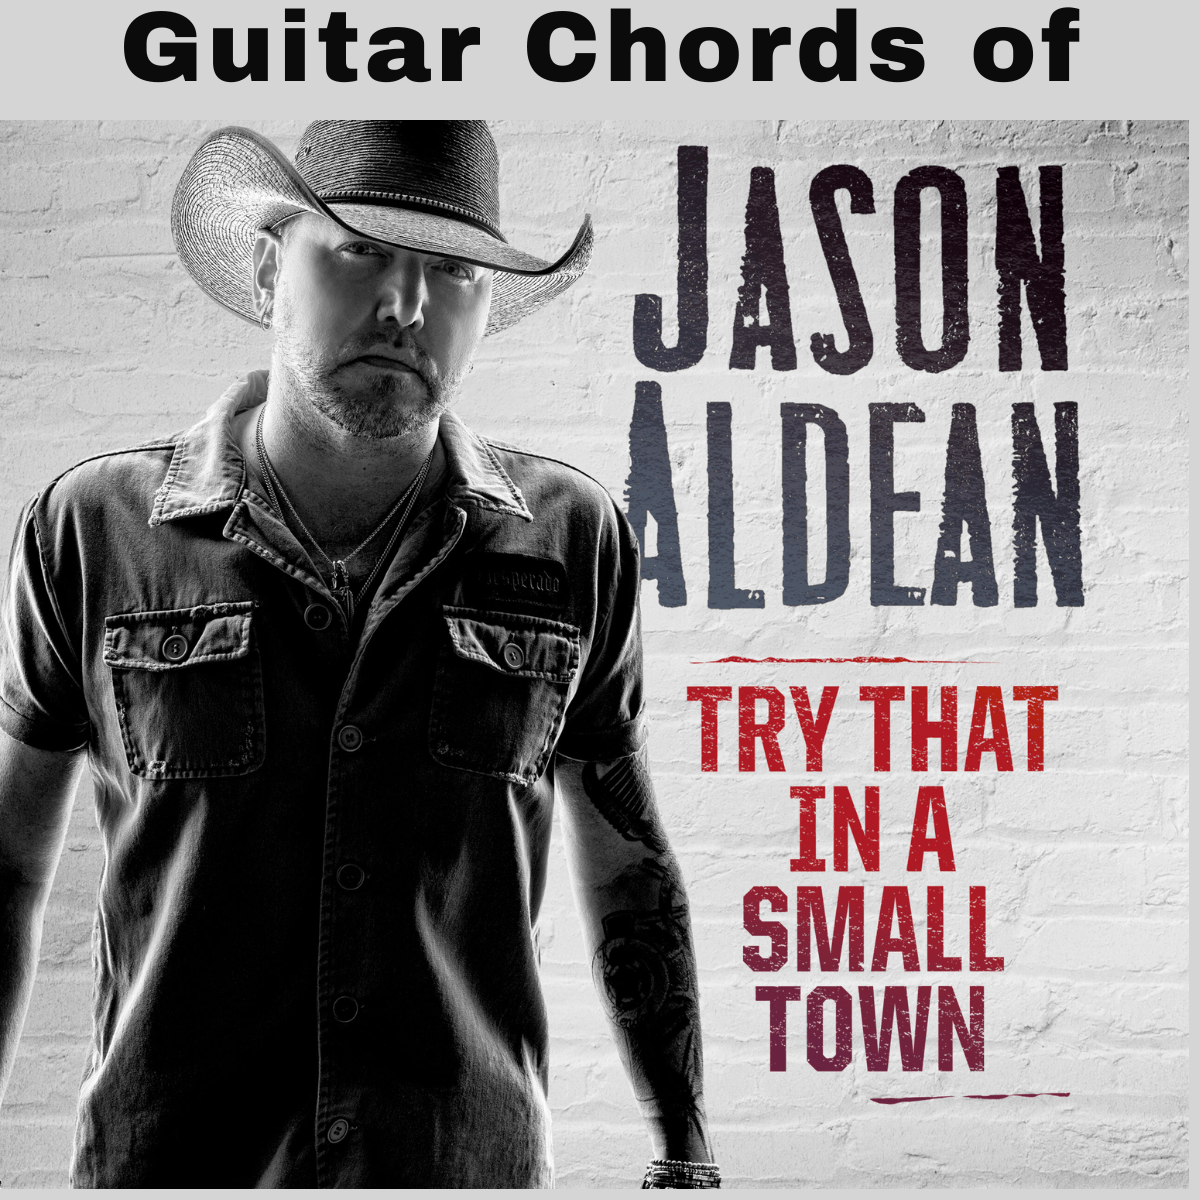 Try that in a small town chords - jason aldean